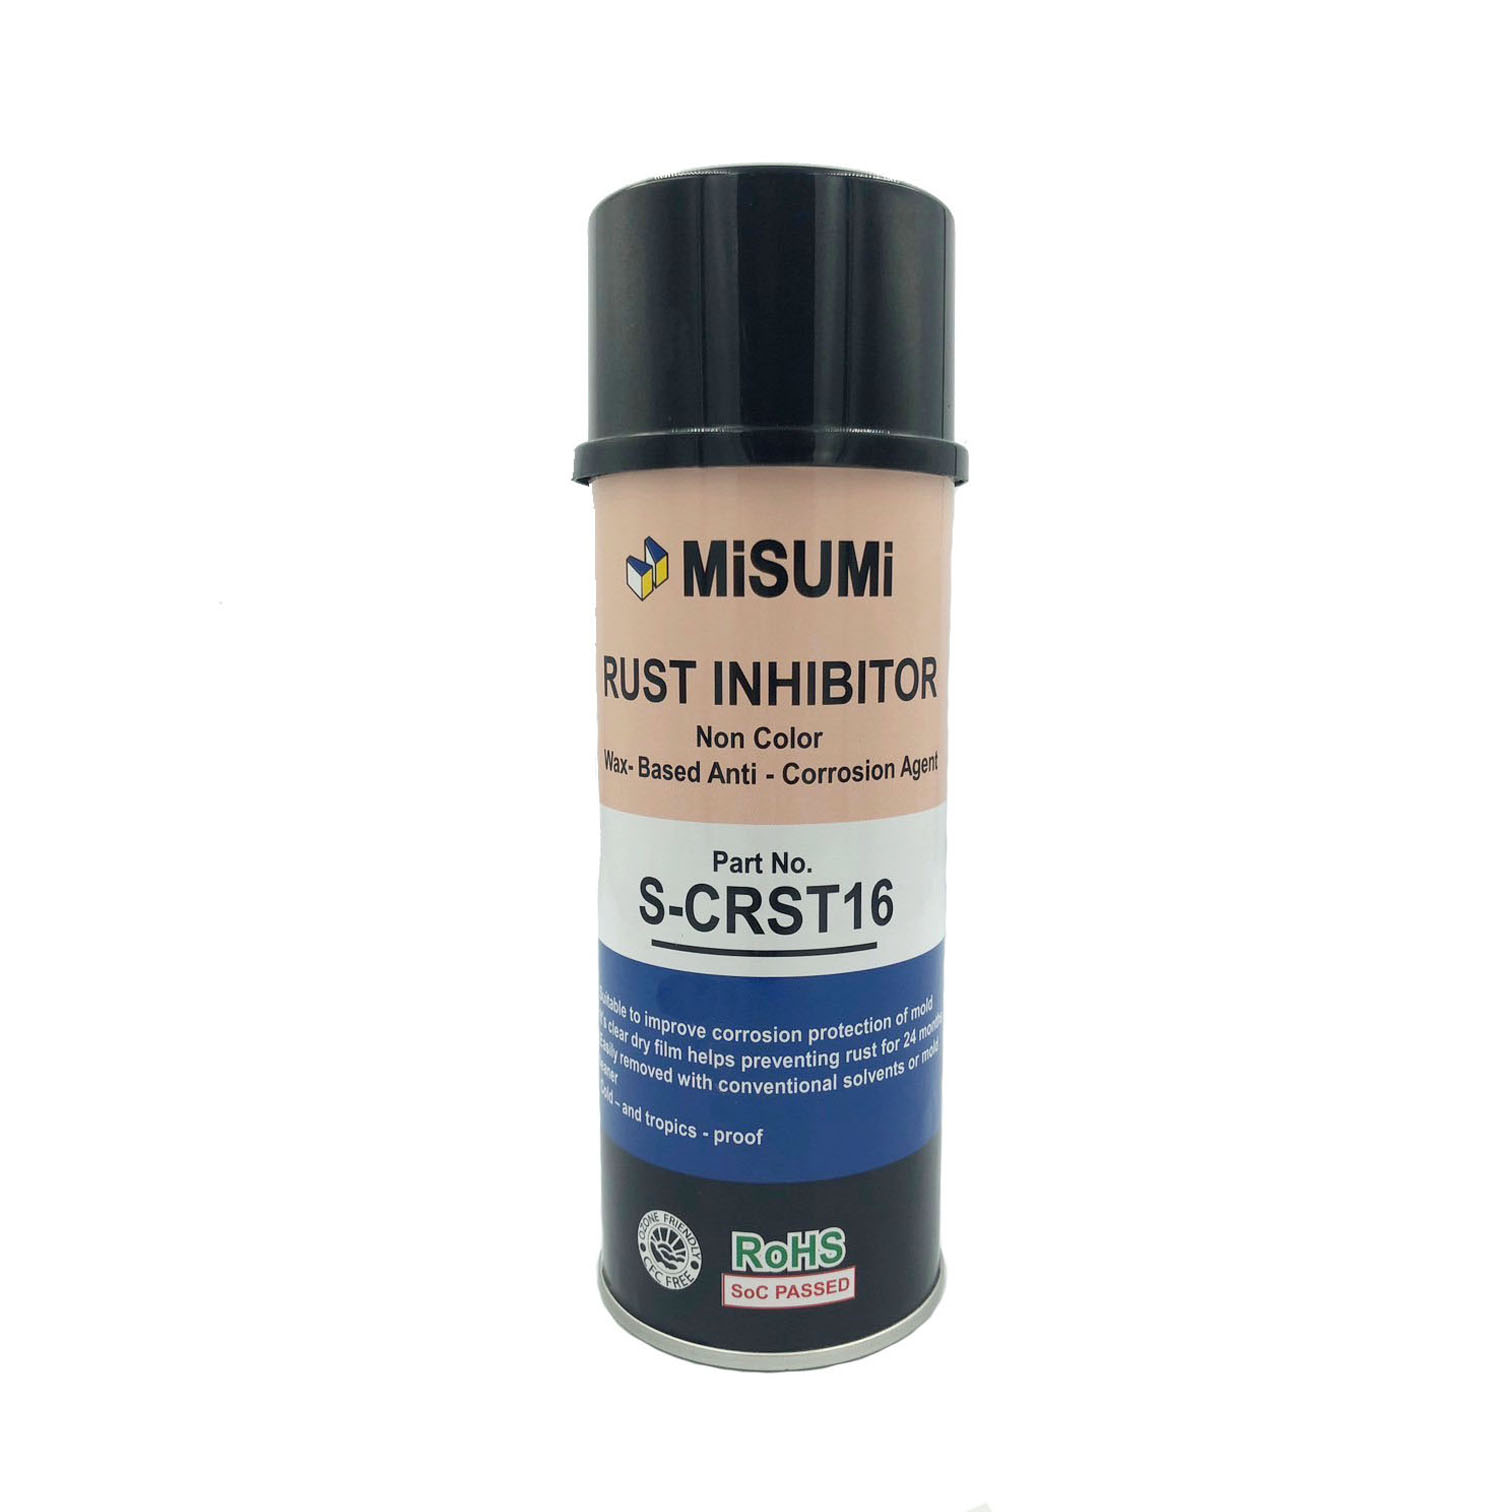 RUST INHIBITOR NON COLOR